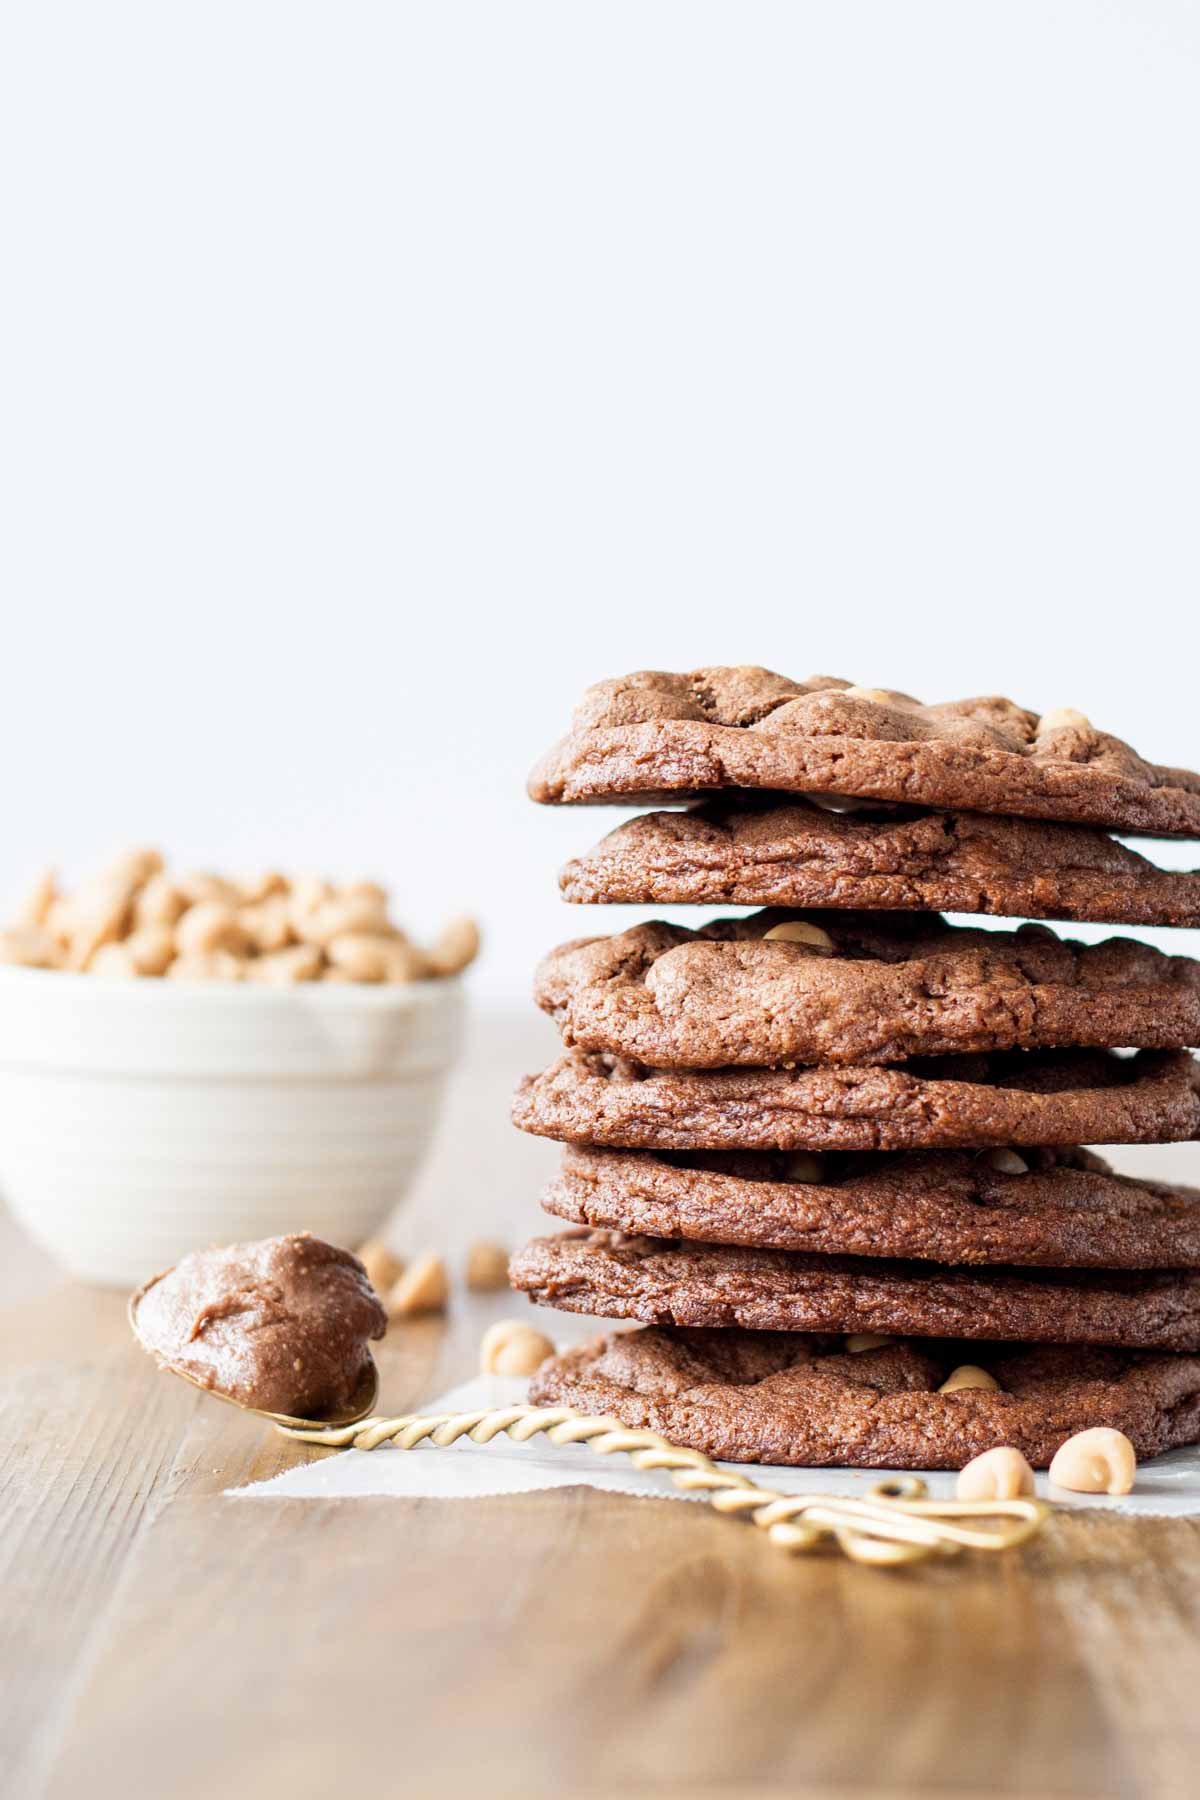 Large stack of cookies.